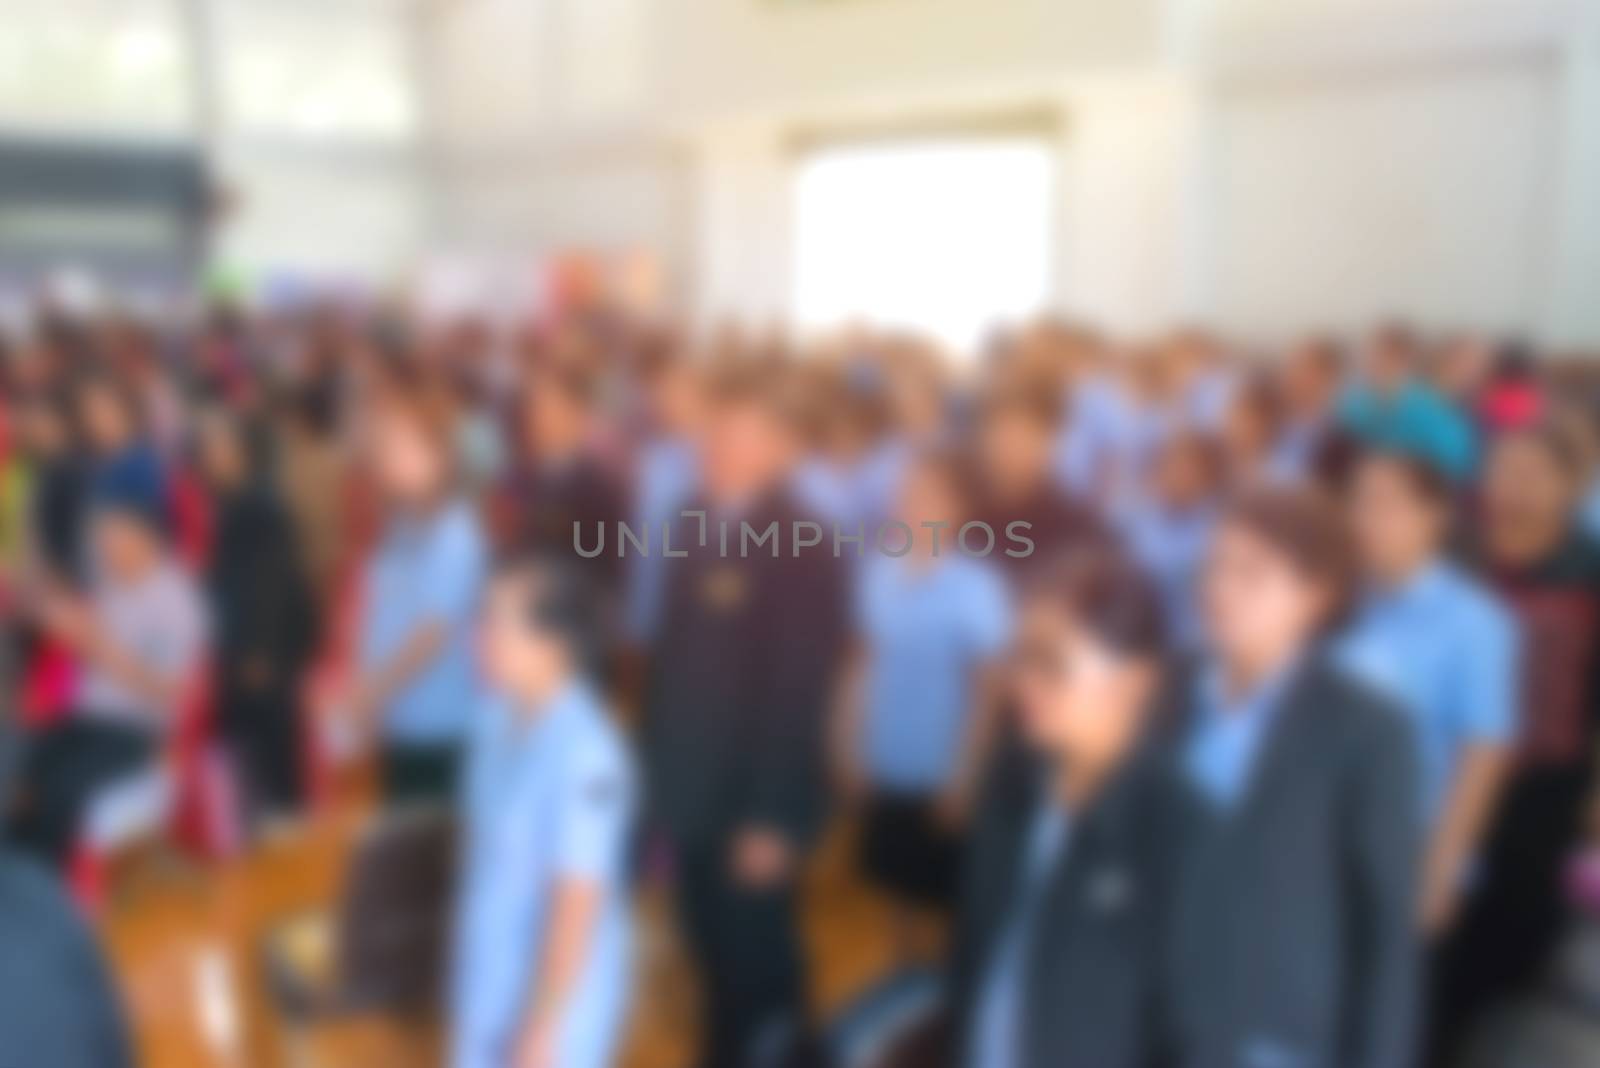 Blur of business Conference and Presentation in the conference hall.